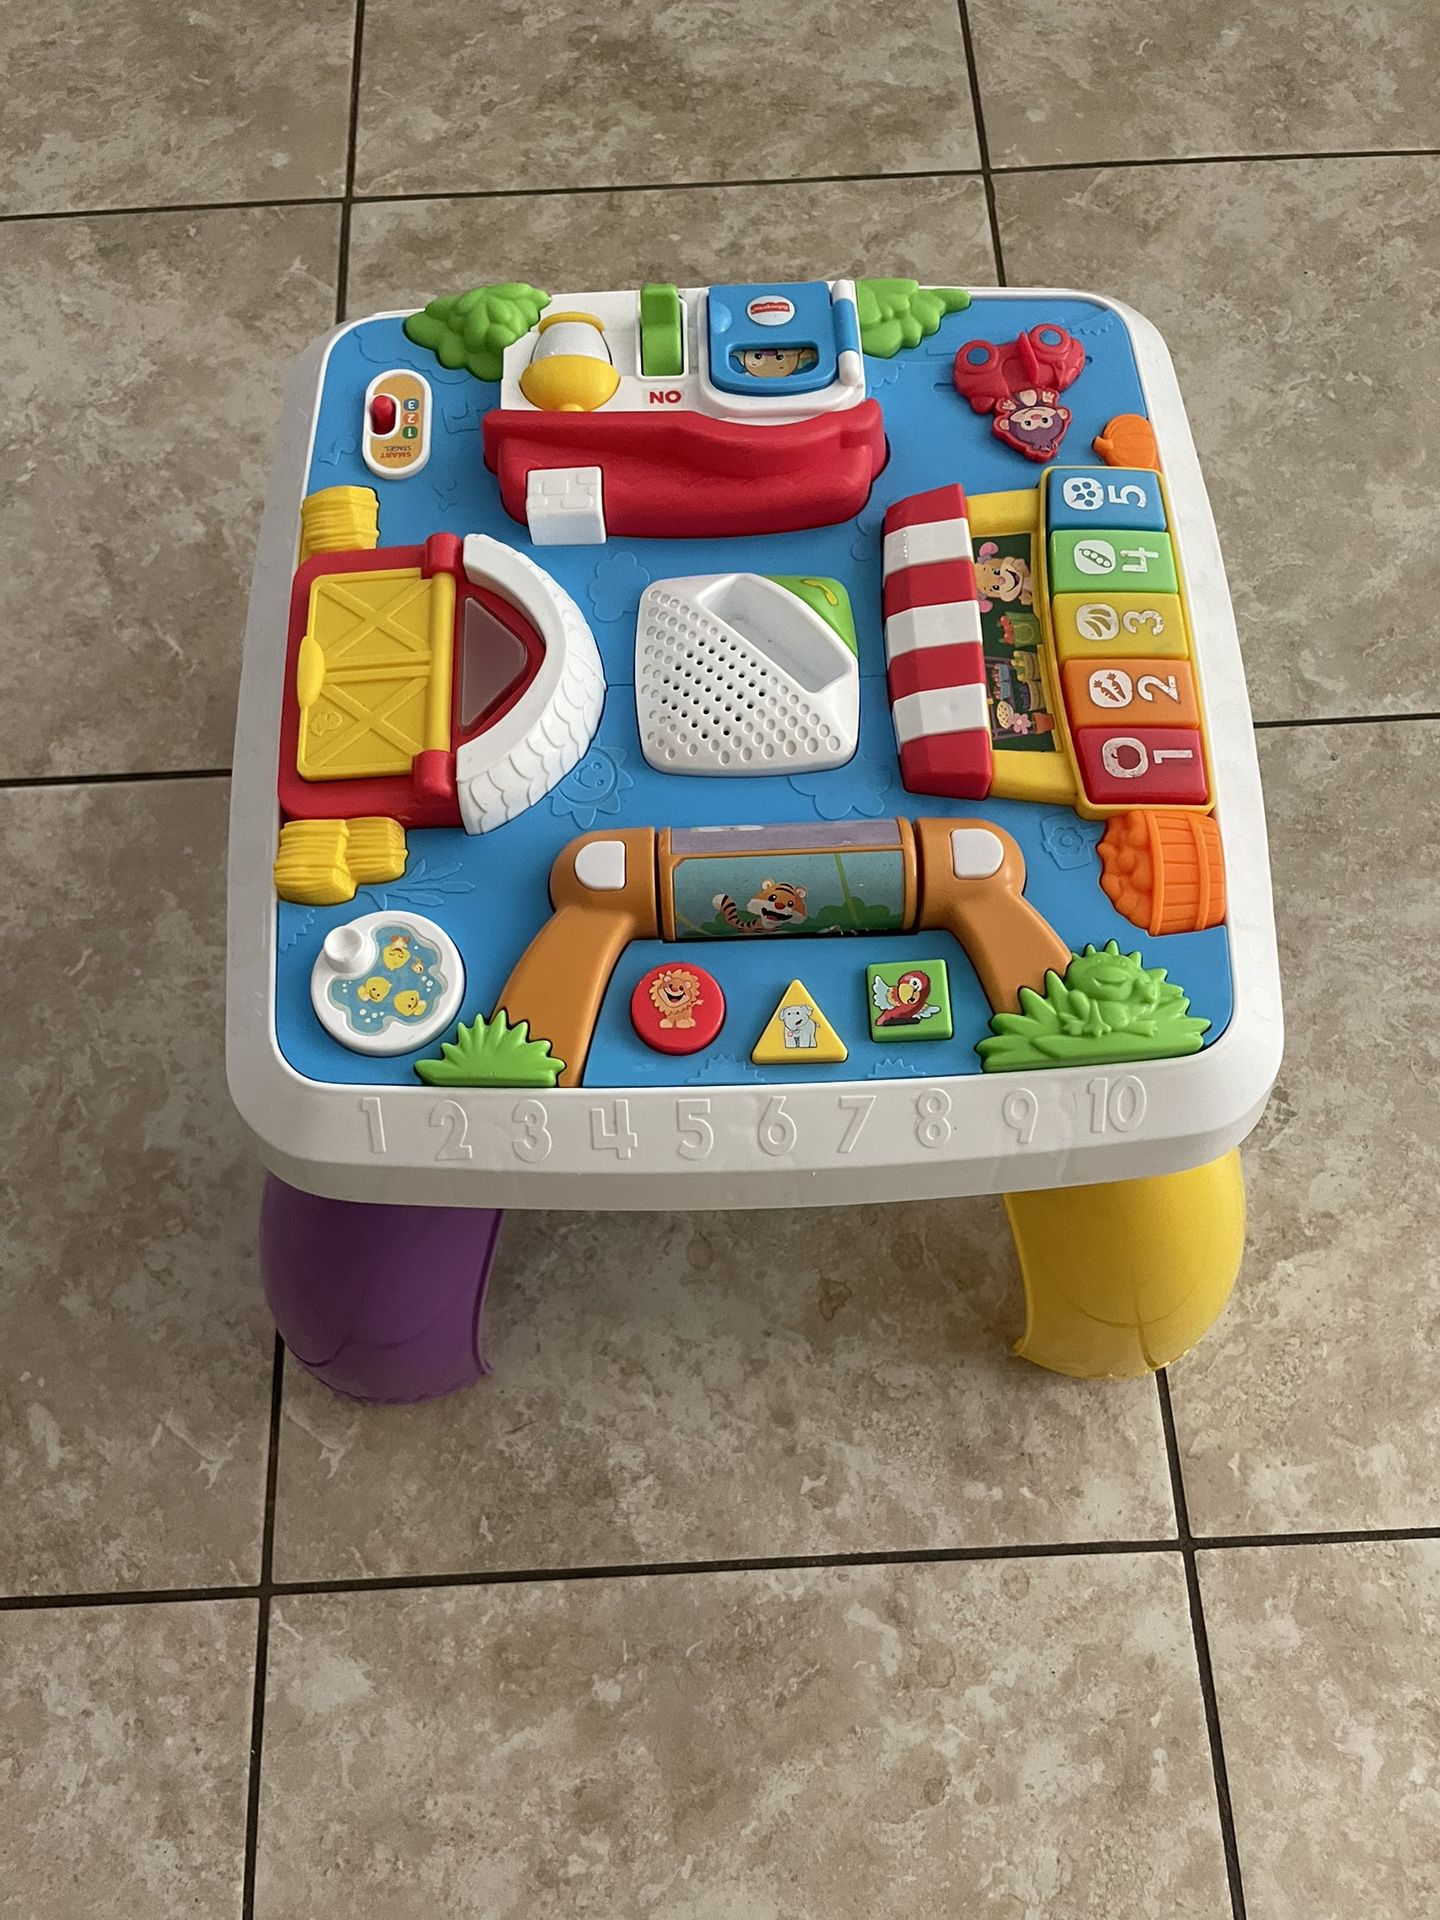 Fisher-Price Learning Table 